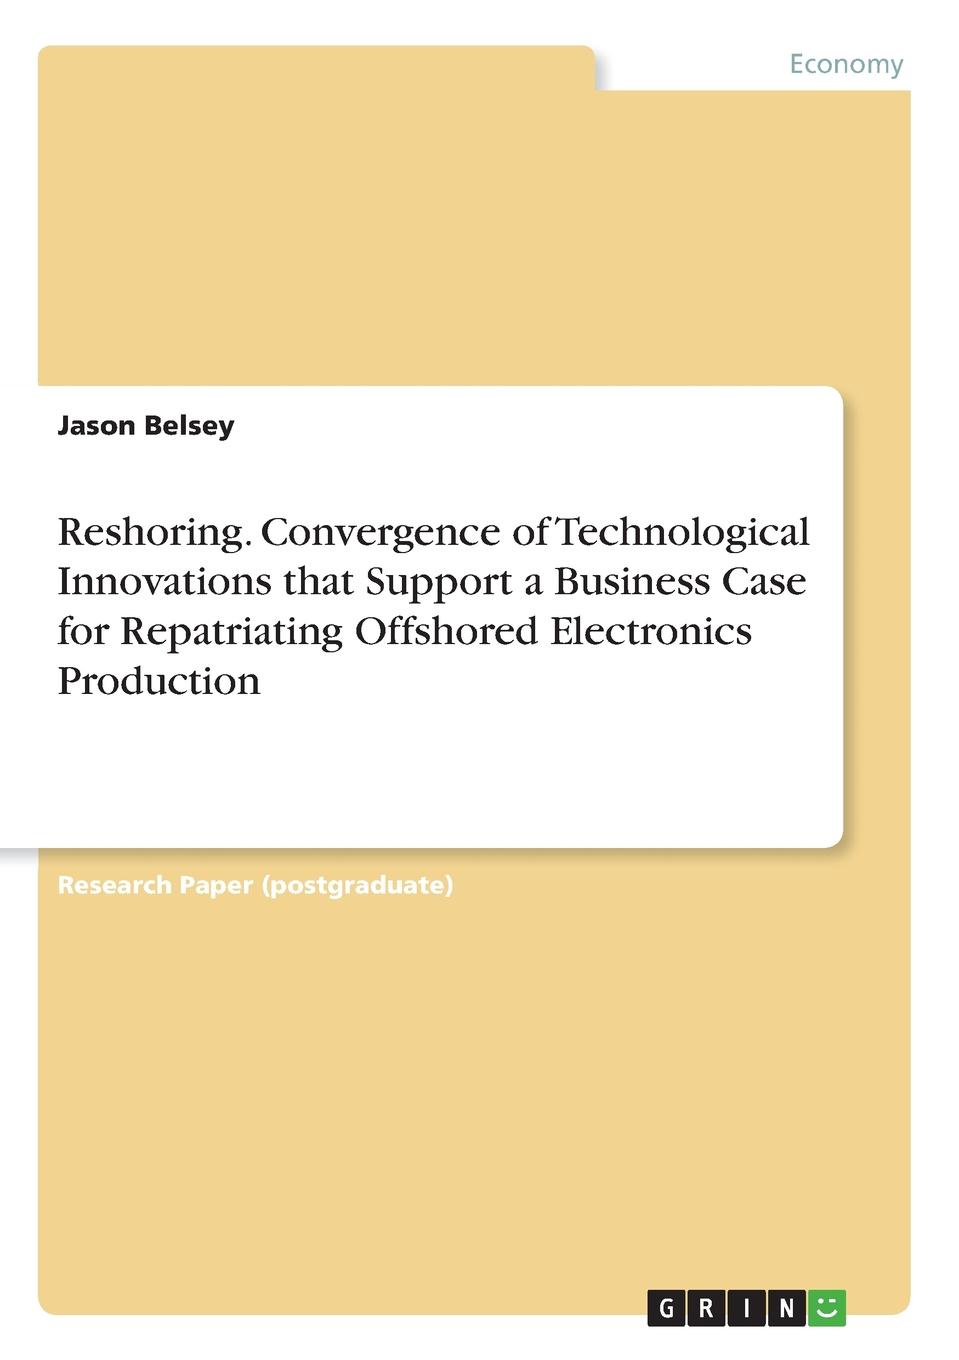 фото Reshoring. Convergence of Technological Innovations that Support a Business Case for Repatriating Offshored Electronics Production